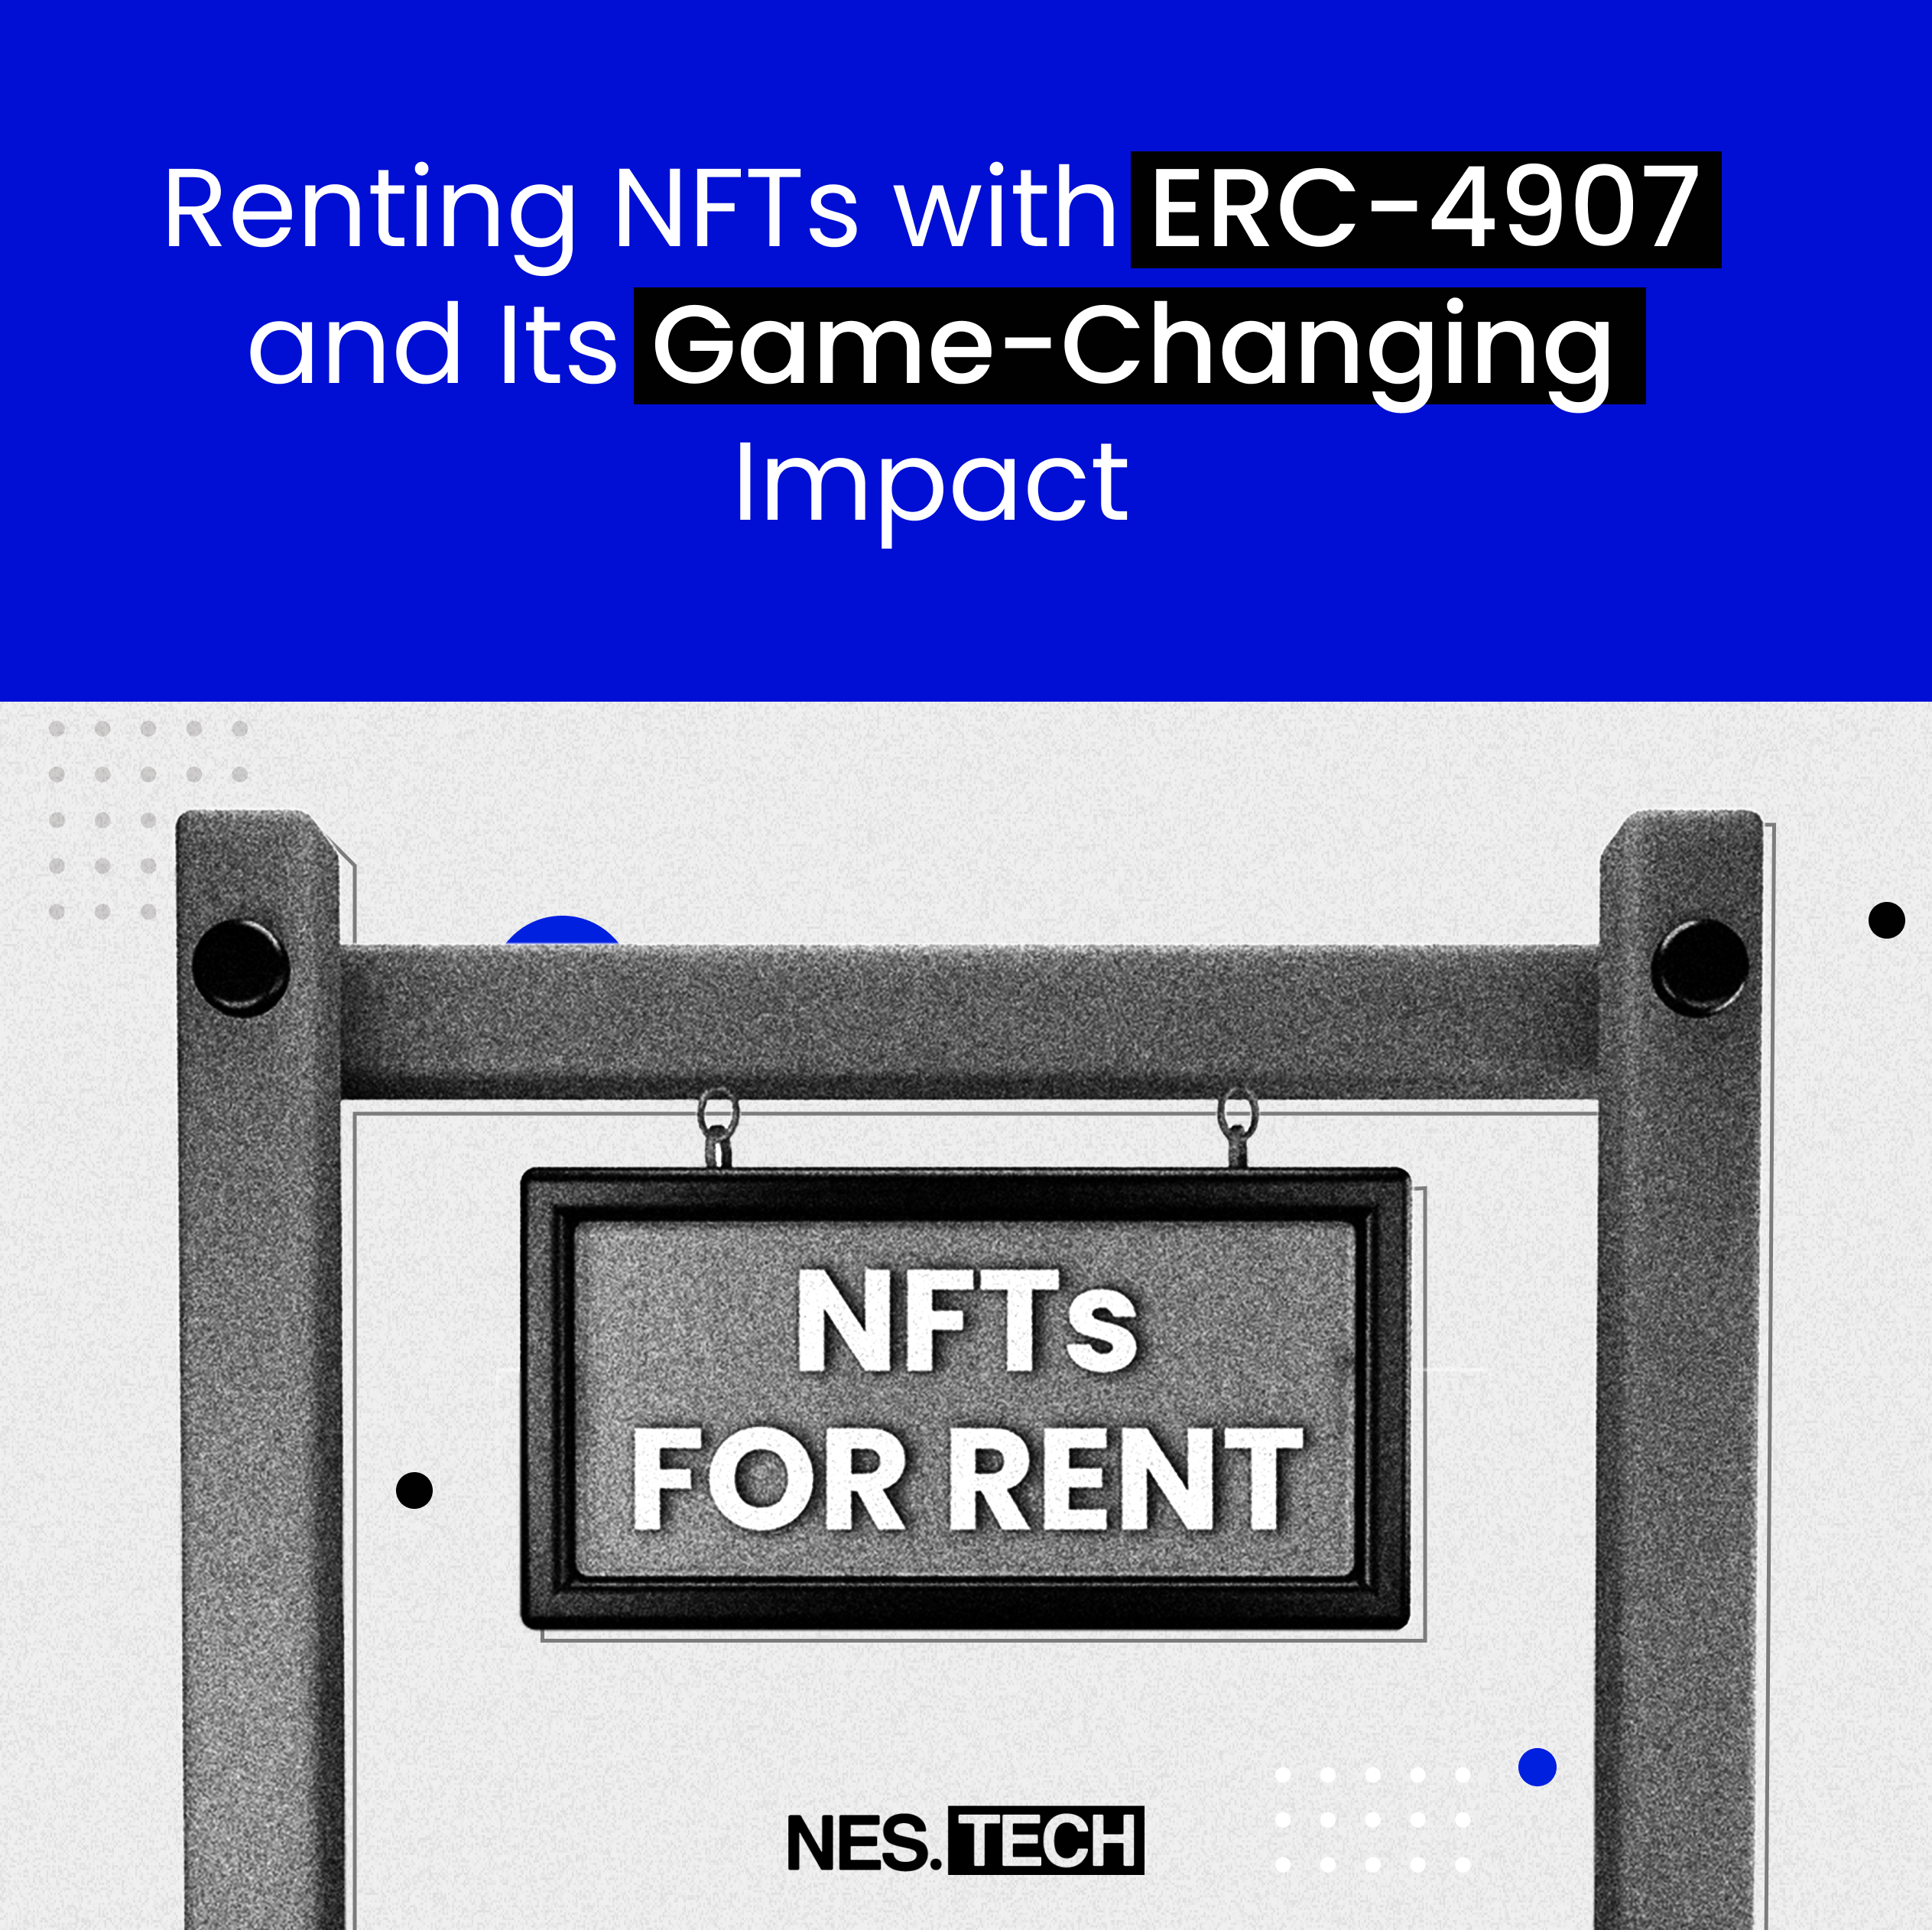 Renting NFTs With ERC-4907 And Its Game-Changing Impact